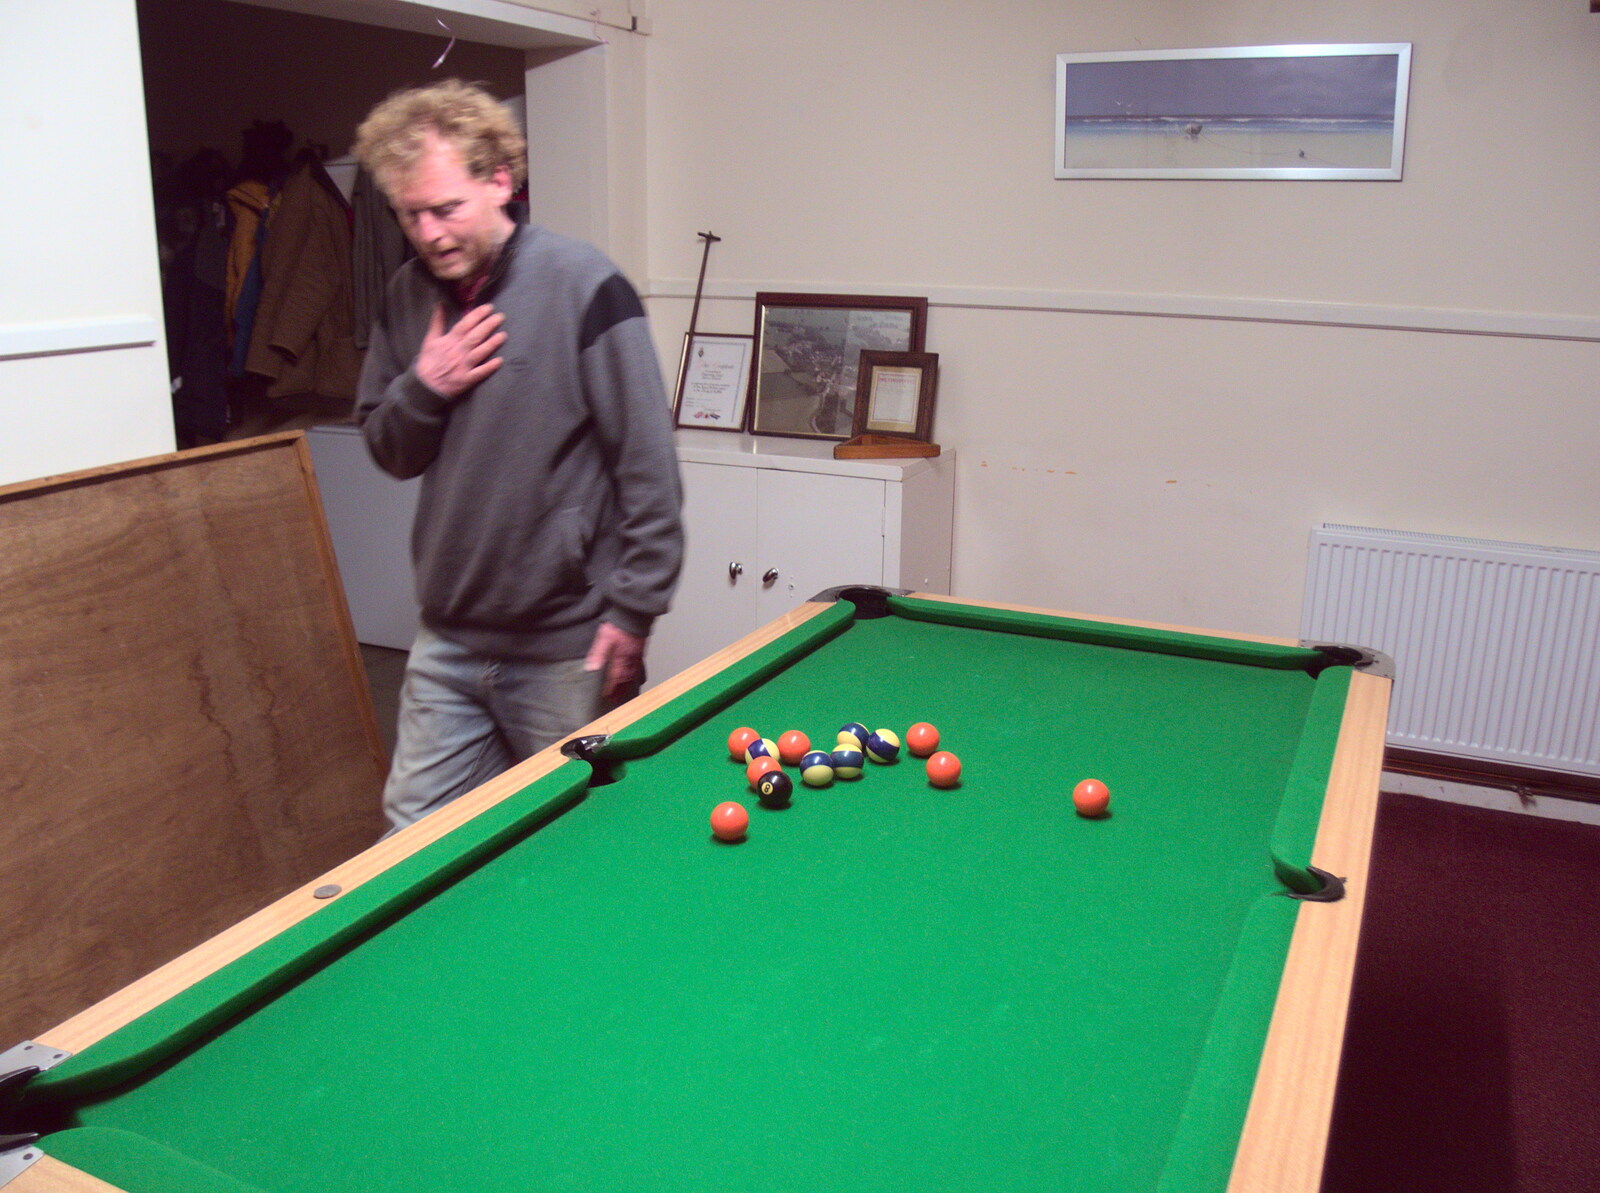 Wavy's by the pool table in the village hall from Quizzes and Library Books: a February Miscellany, Diss and Eye - 10th February 2018